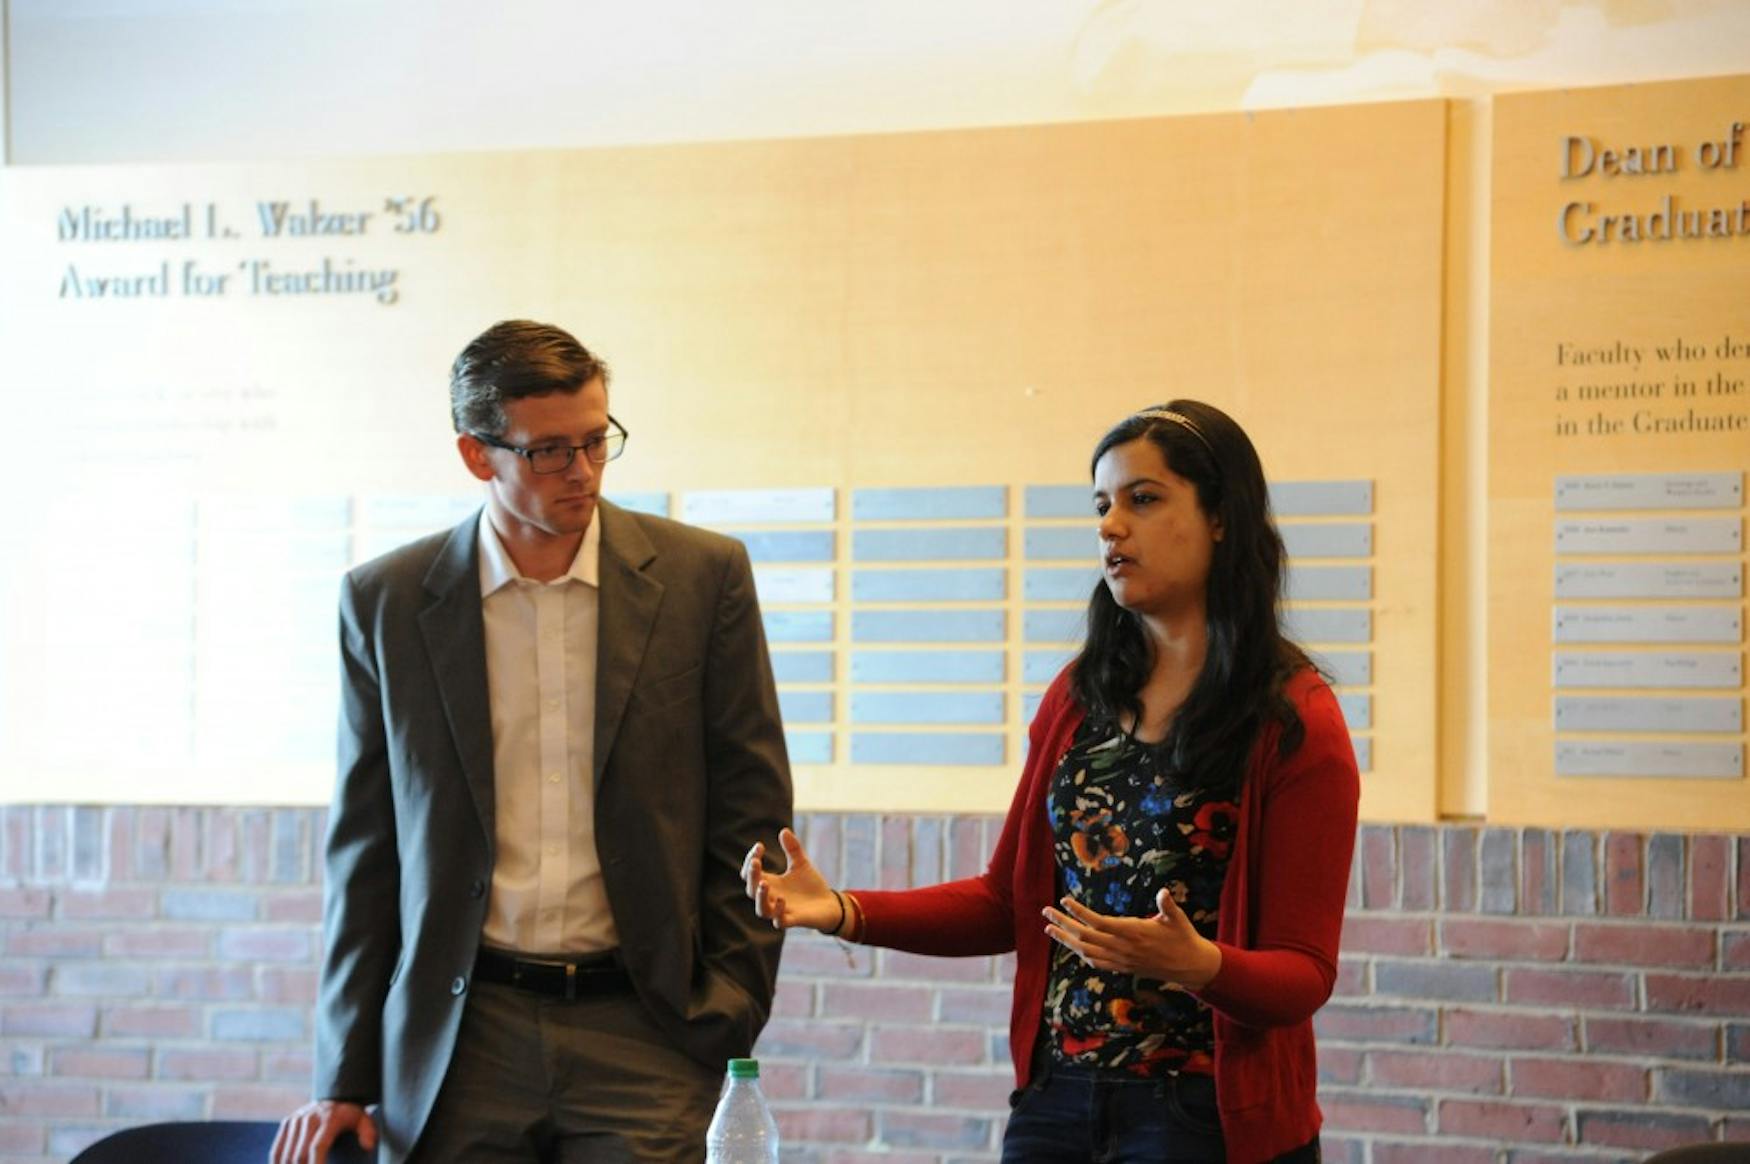 Grady Ward ’16 and Sneha Walia ’15 helped monitor the discussion at the student forum on Thursday.